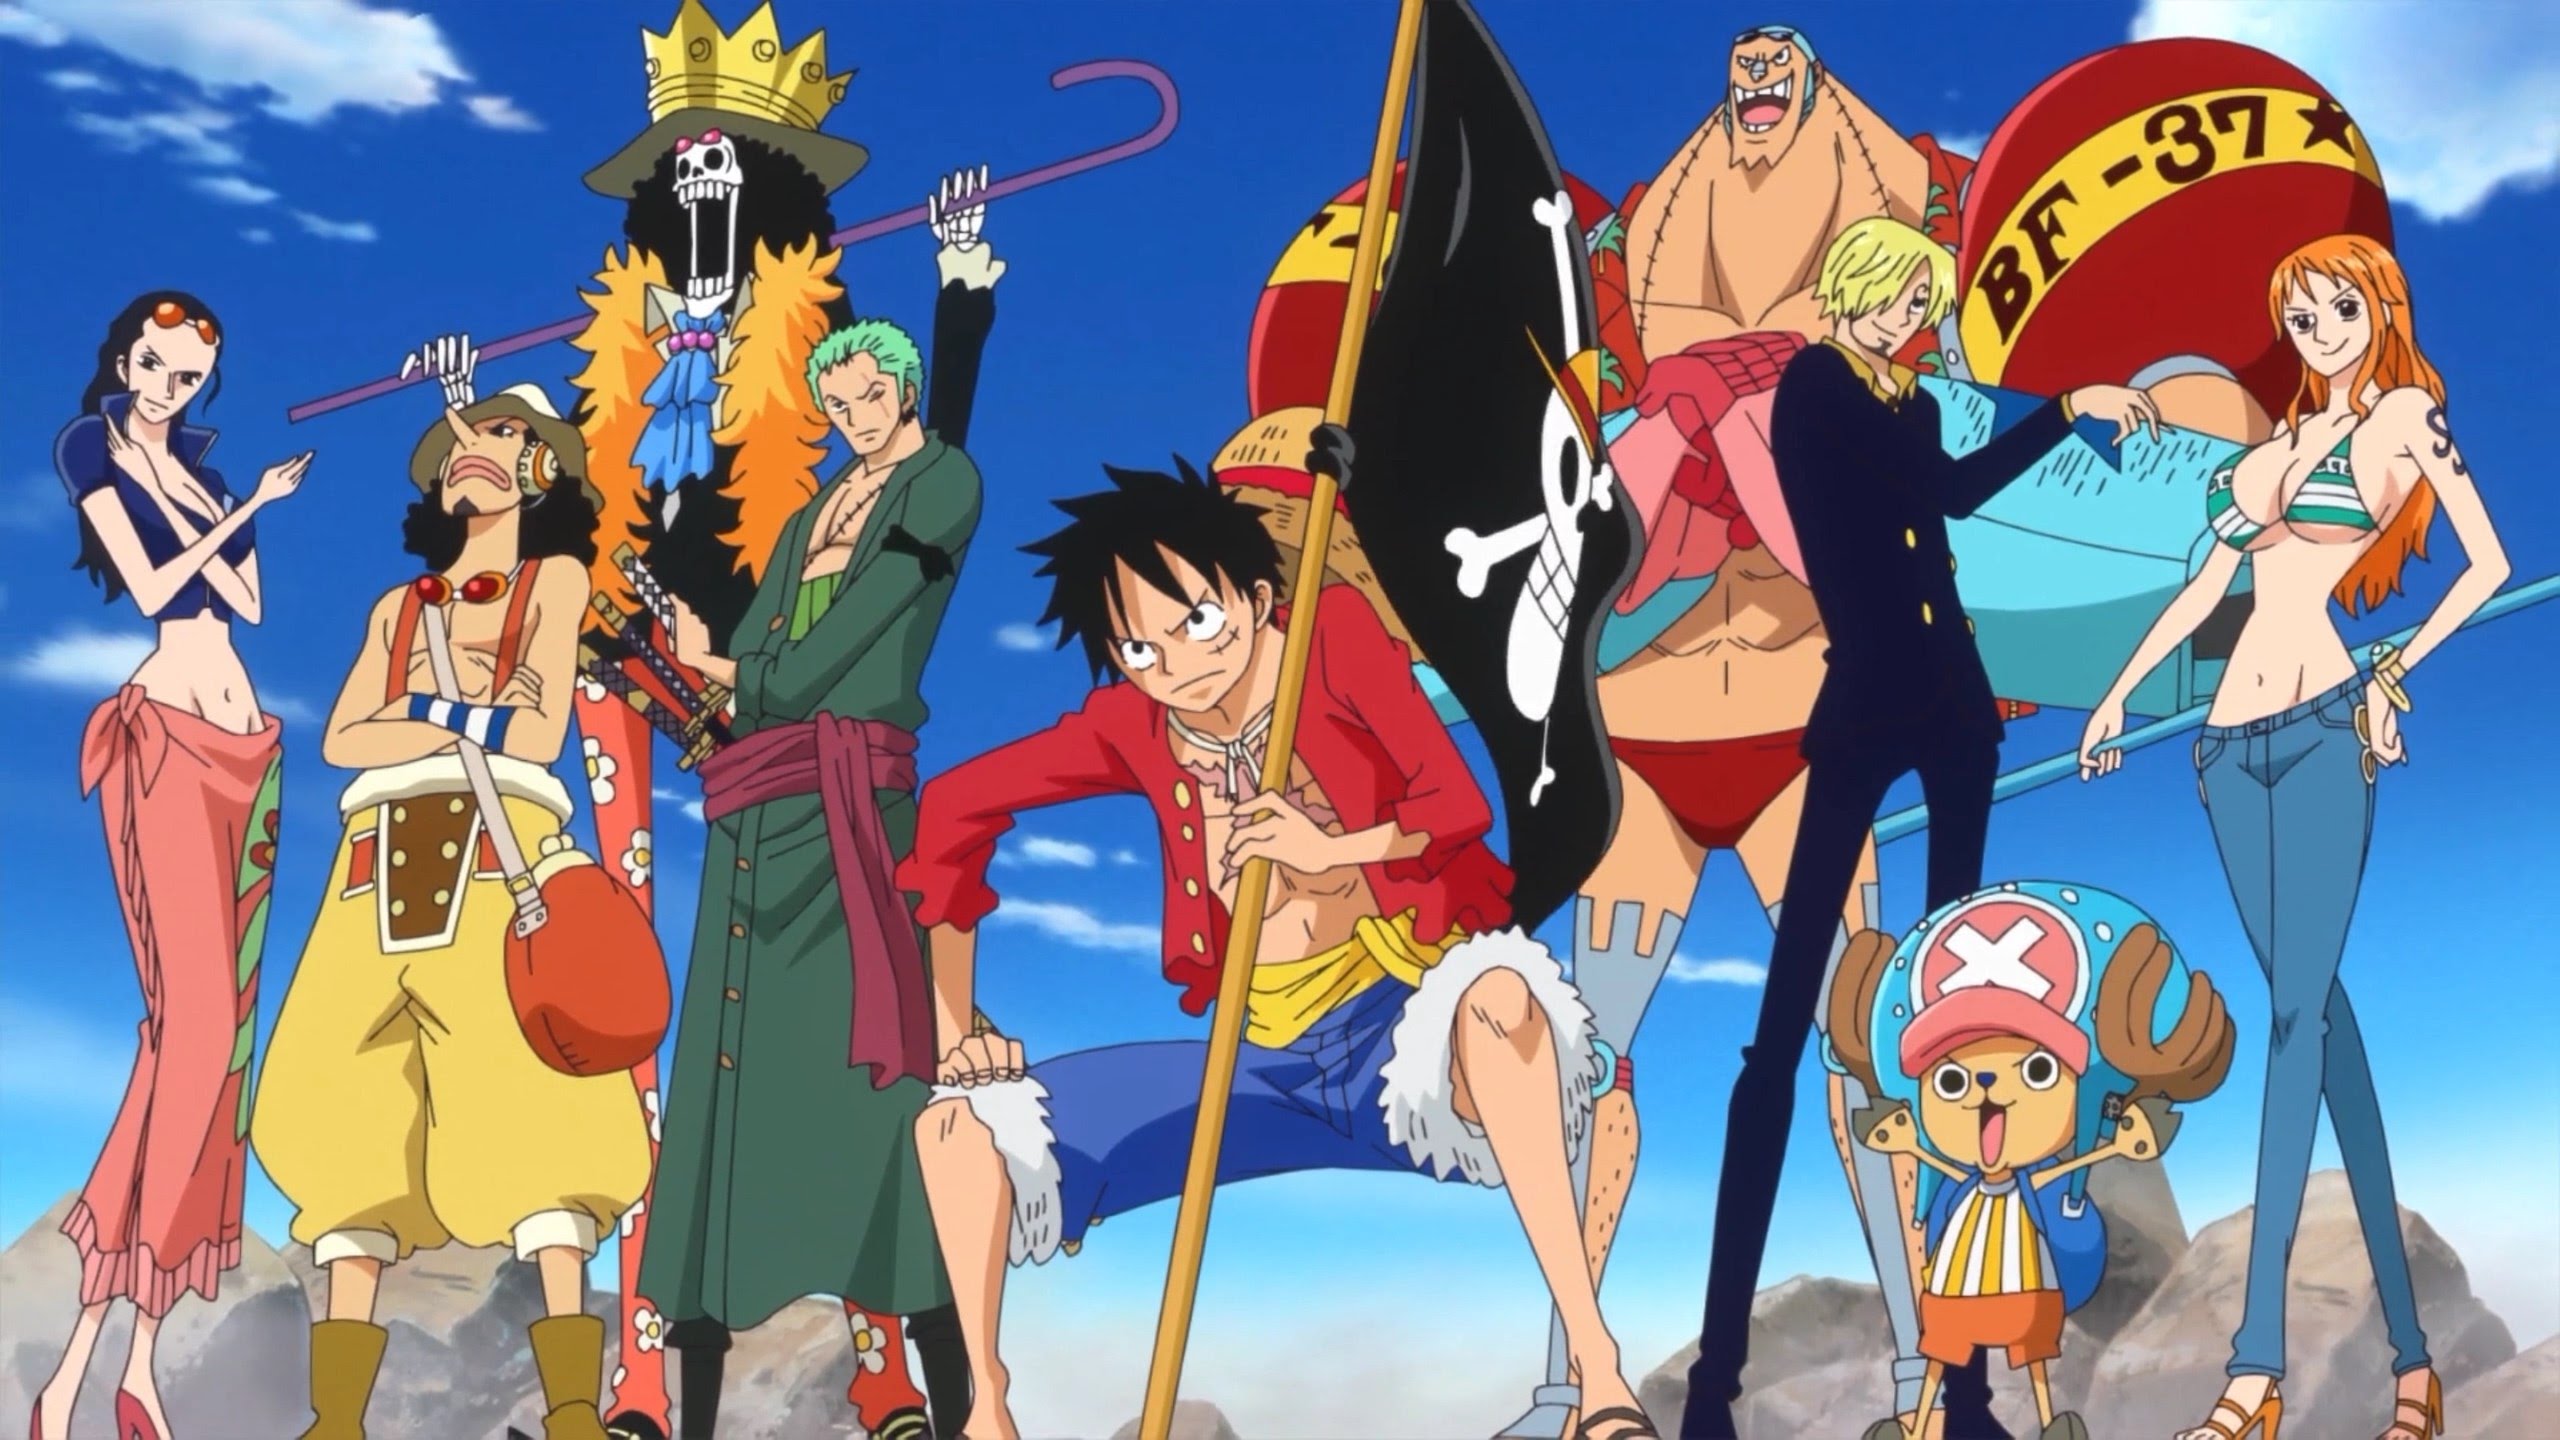 UPDATED: Live-Action One Piece Series Gets 10-Episode Order At Netflix